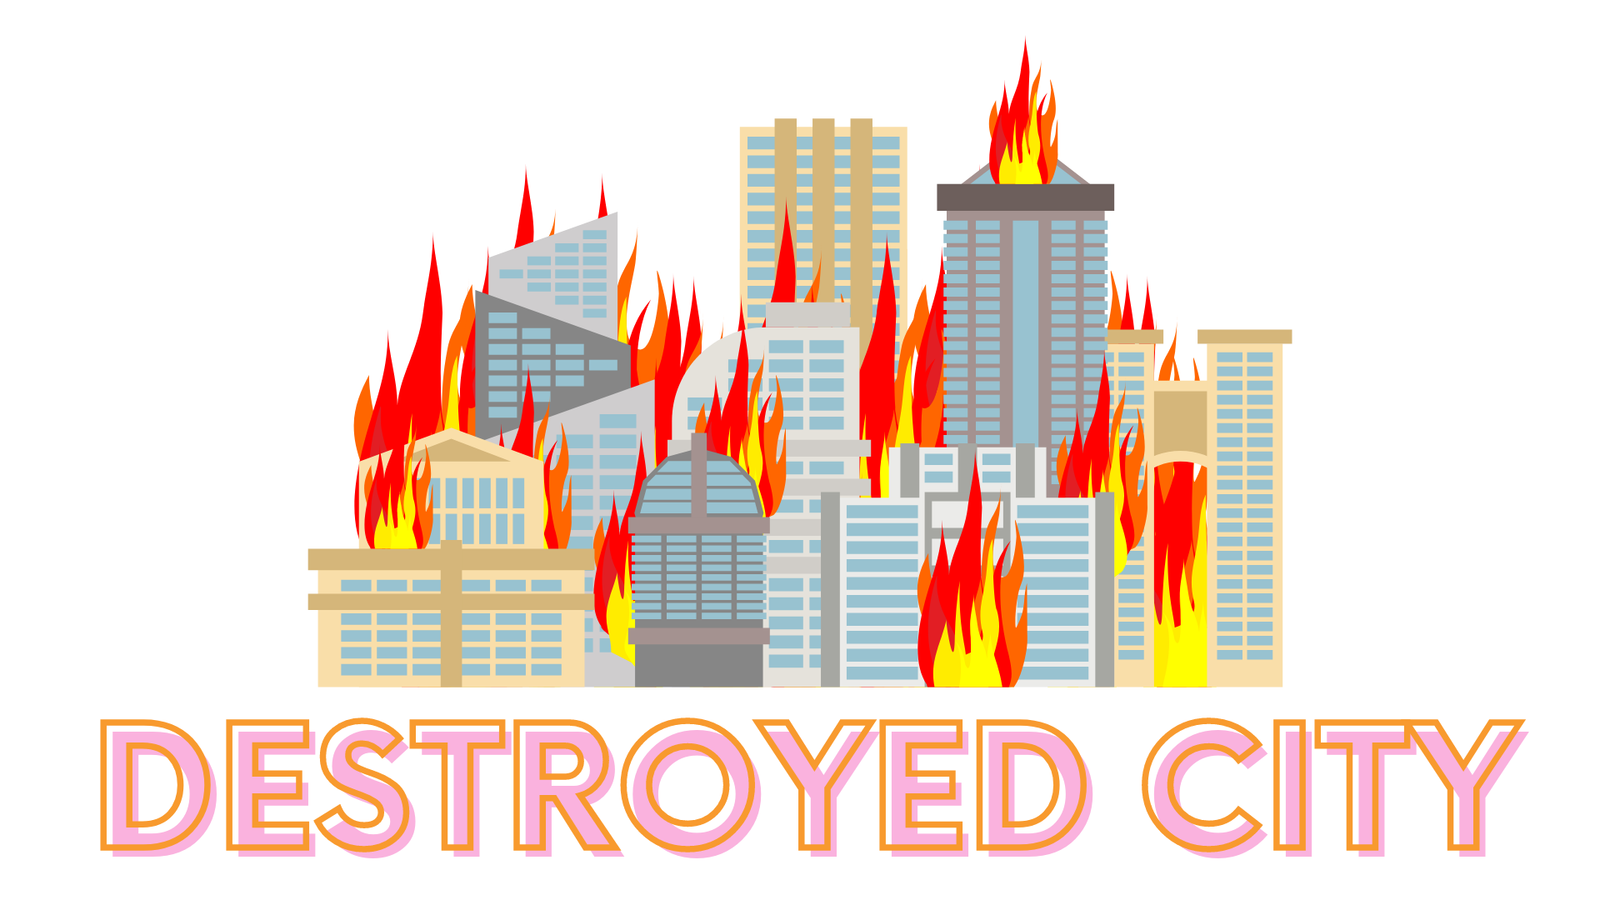 Illustration of city buildings engulfed in flames.